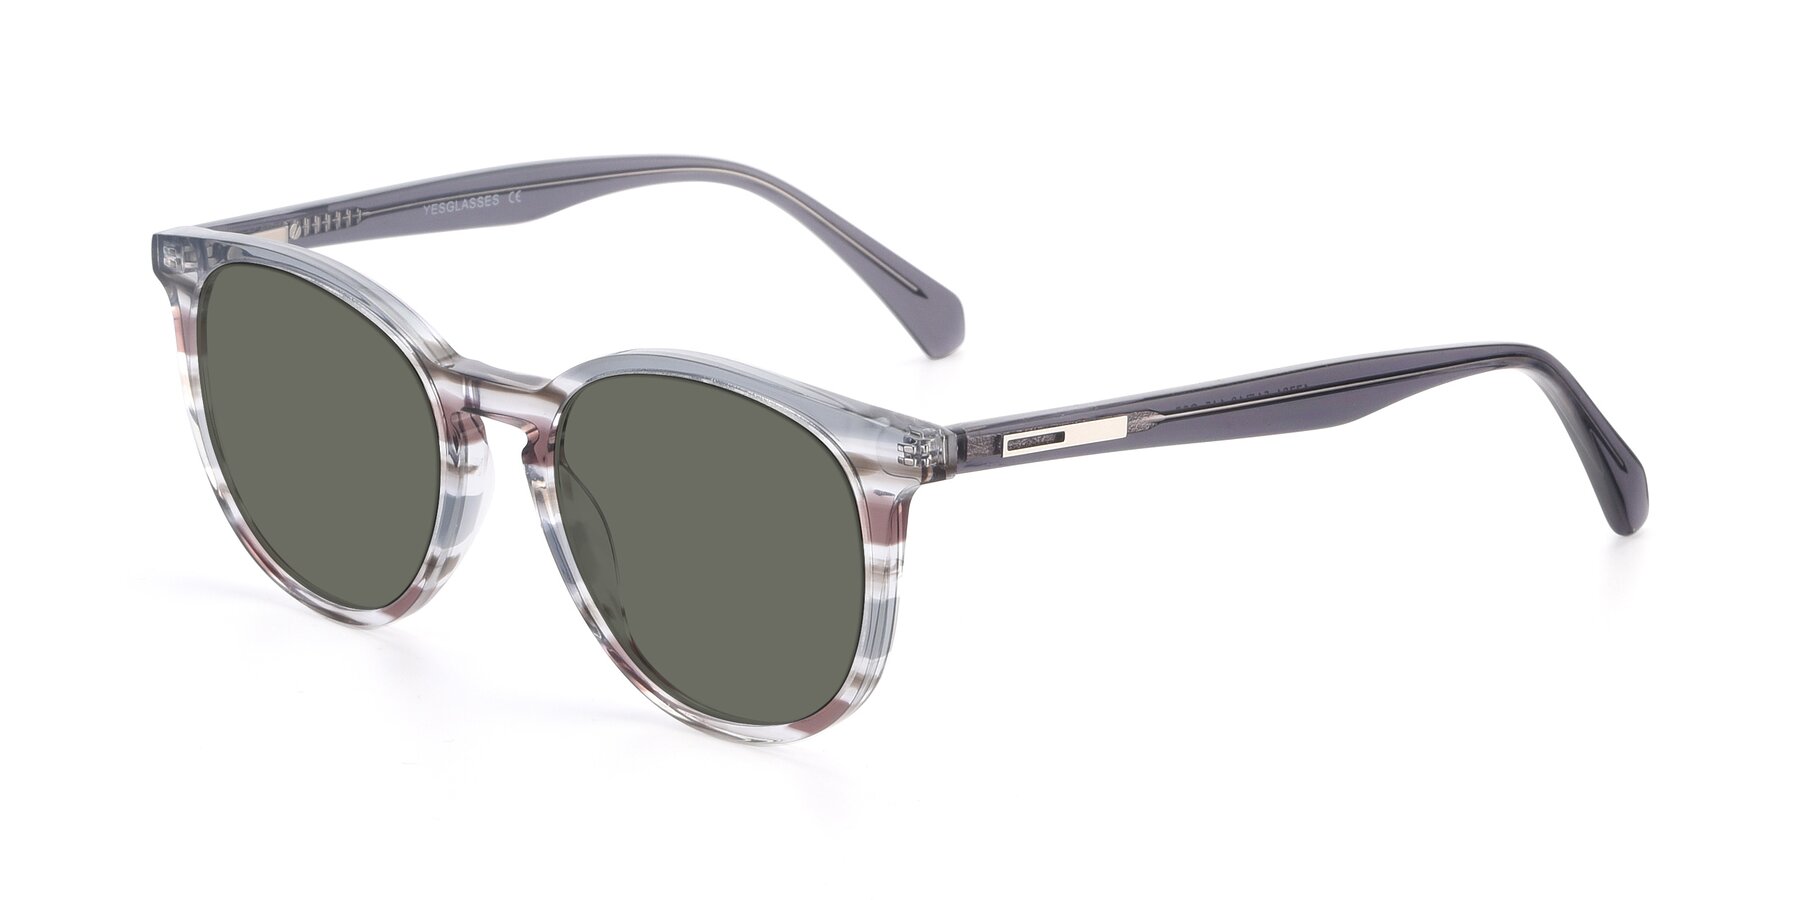 Angle of 17721 in Stripe Grey with Gray Polarized Lenses